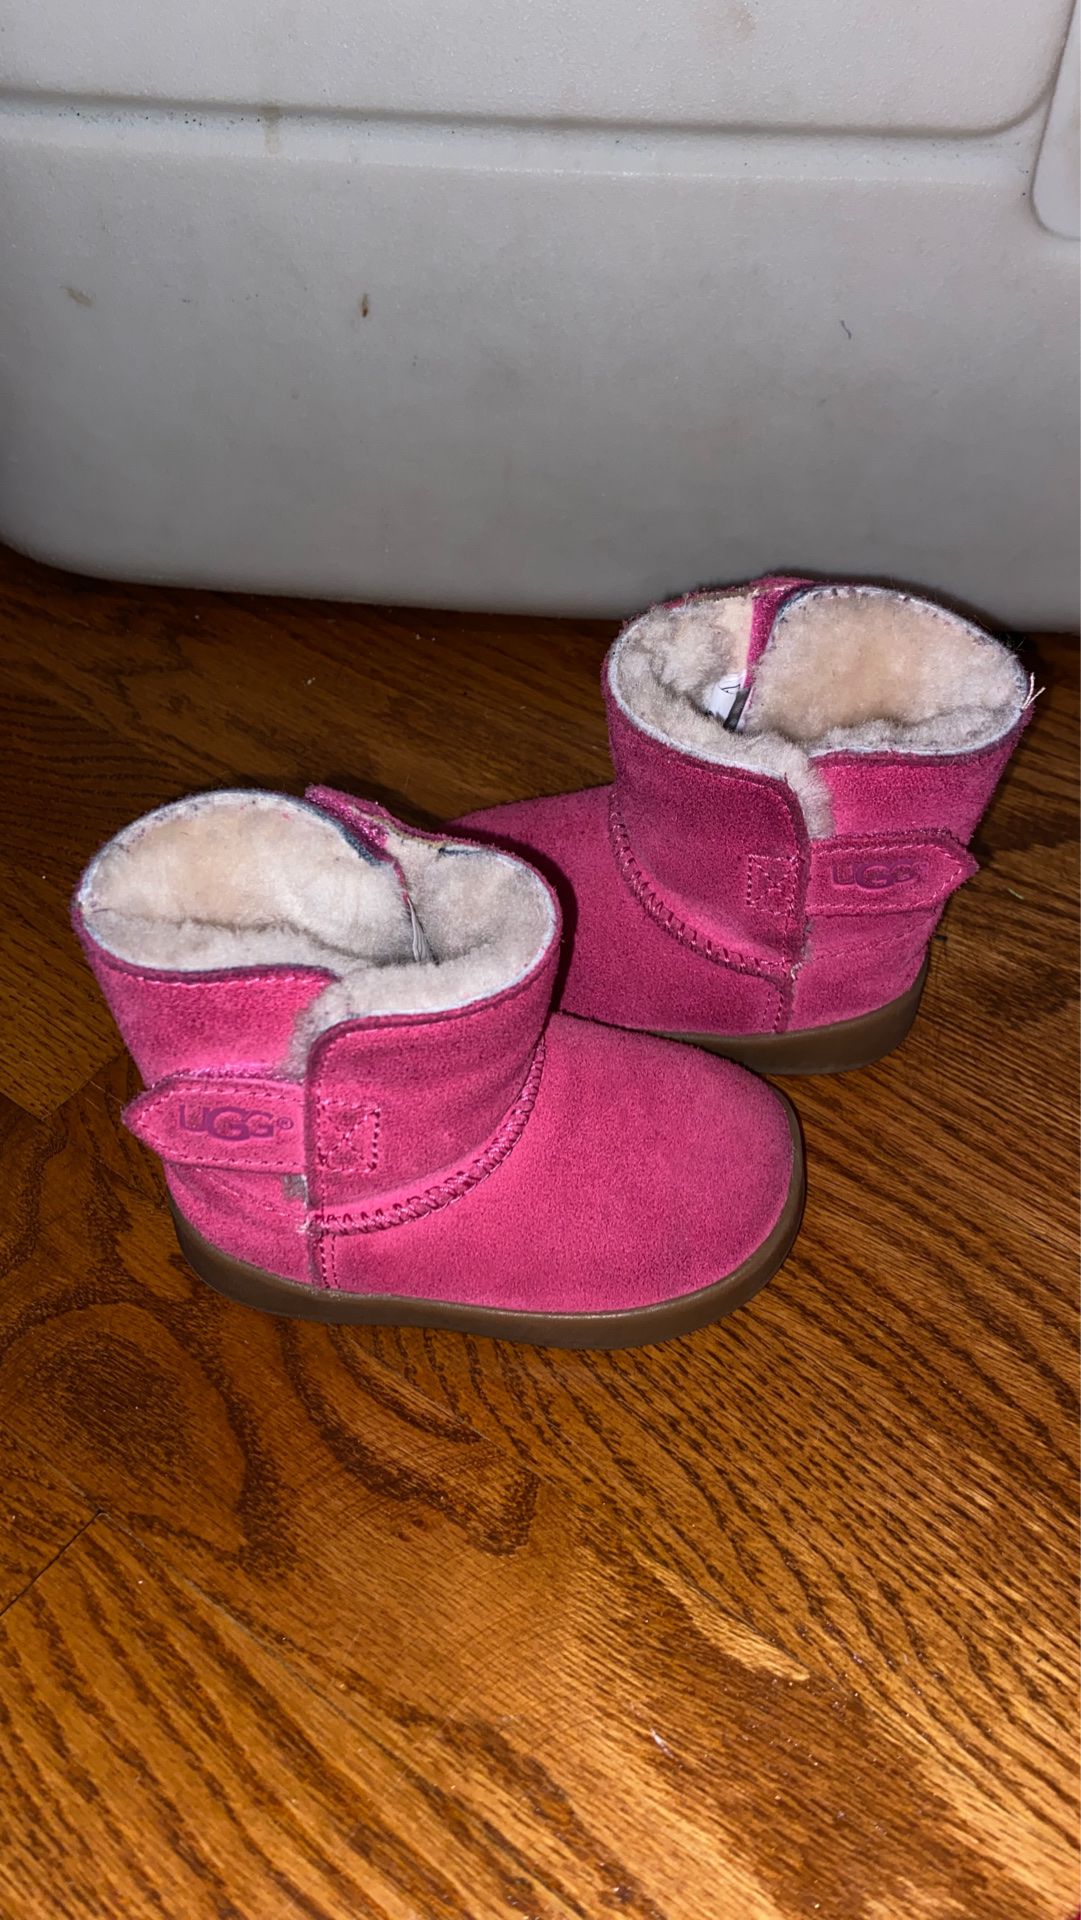 Toddler Girls size 5 Ugg boots